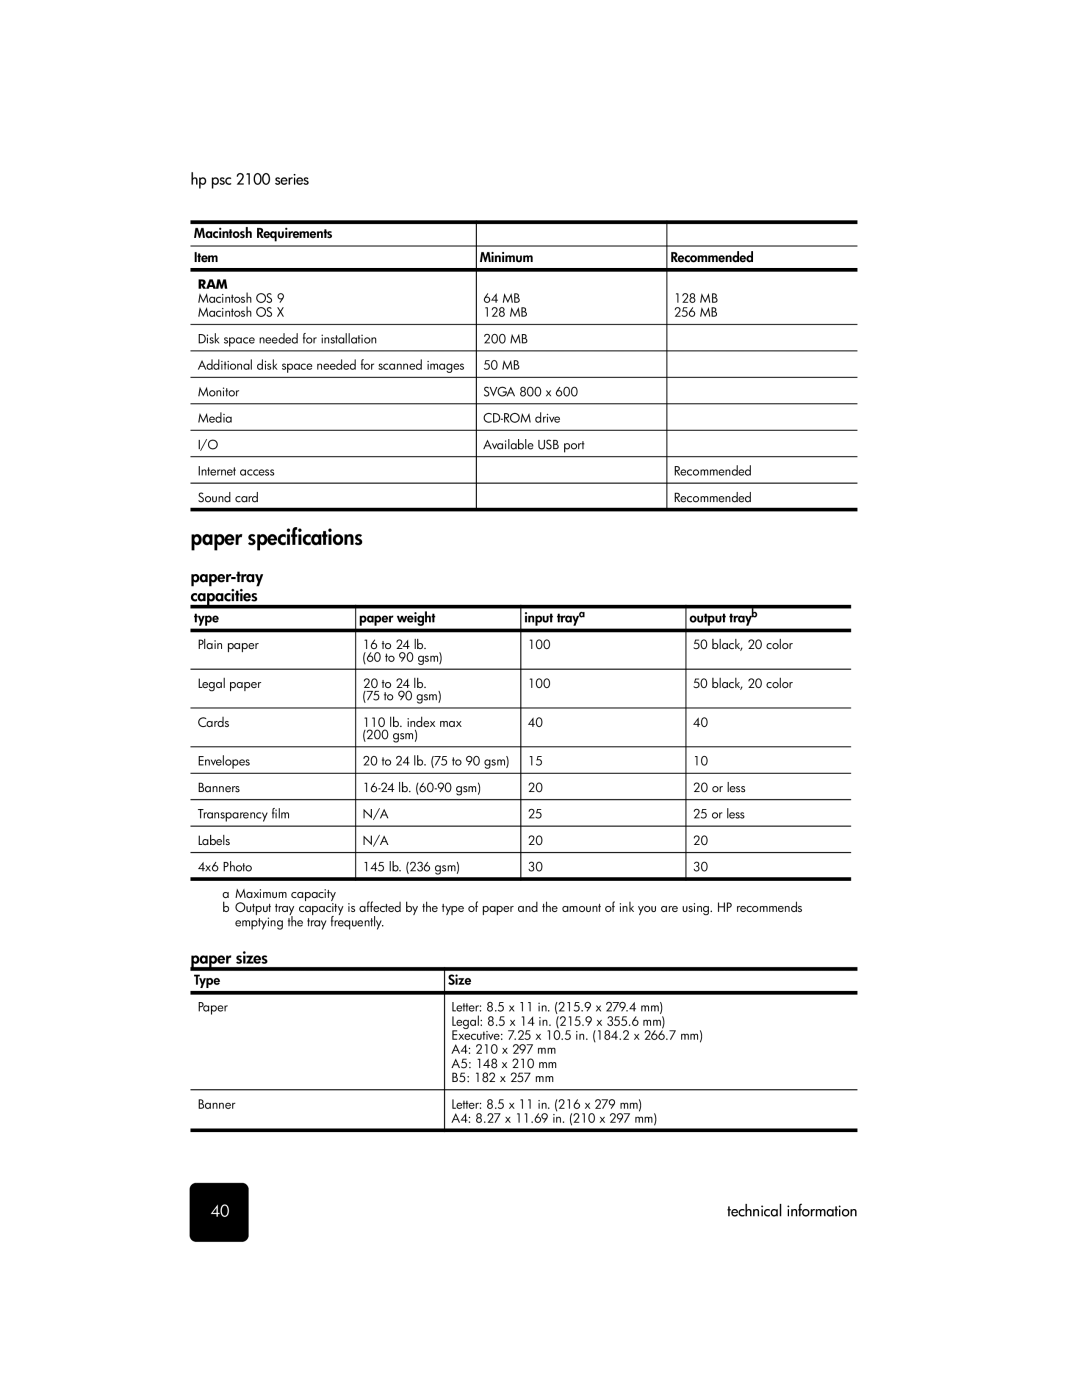 HP 2100 manual Paper specifications, Paper-tray capacities, Paper sizes 